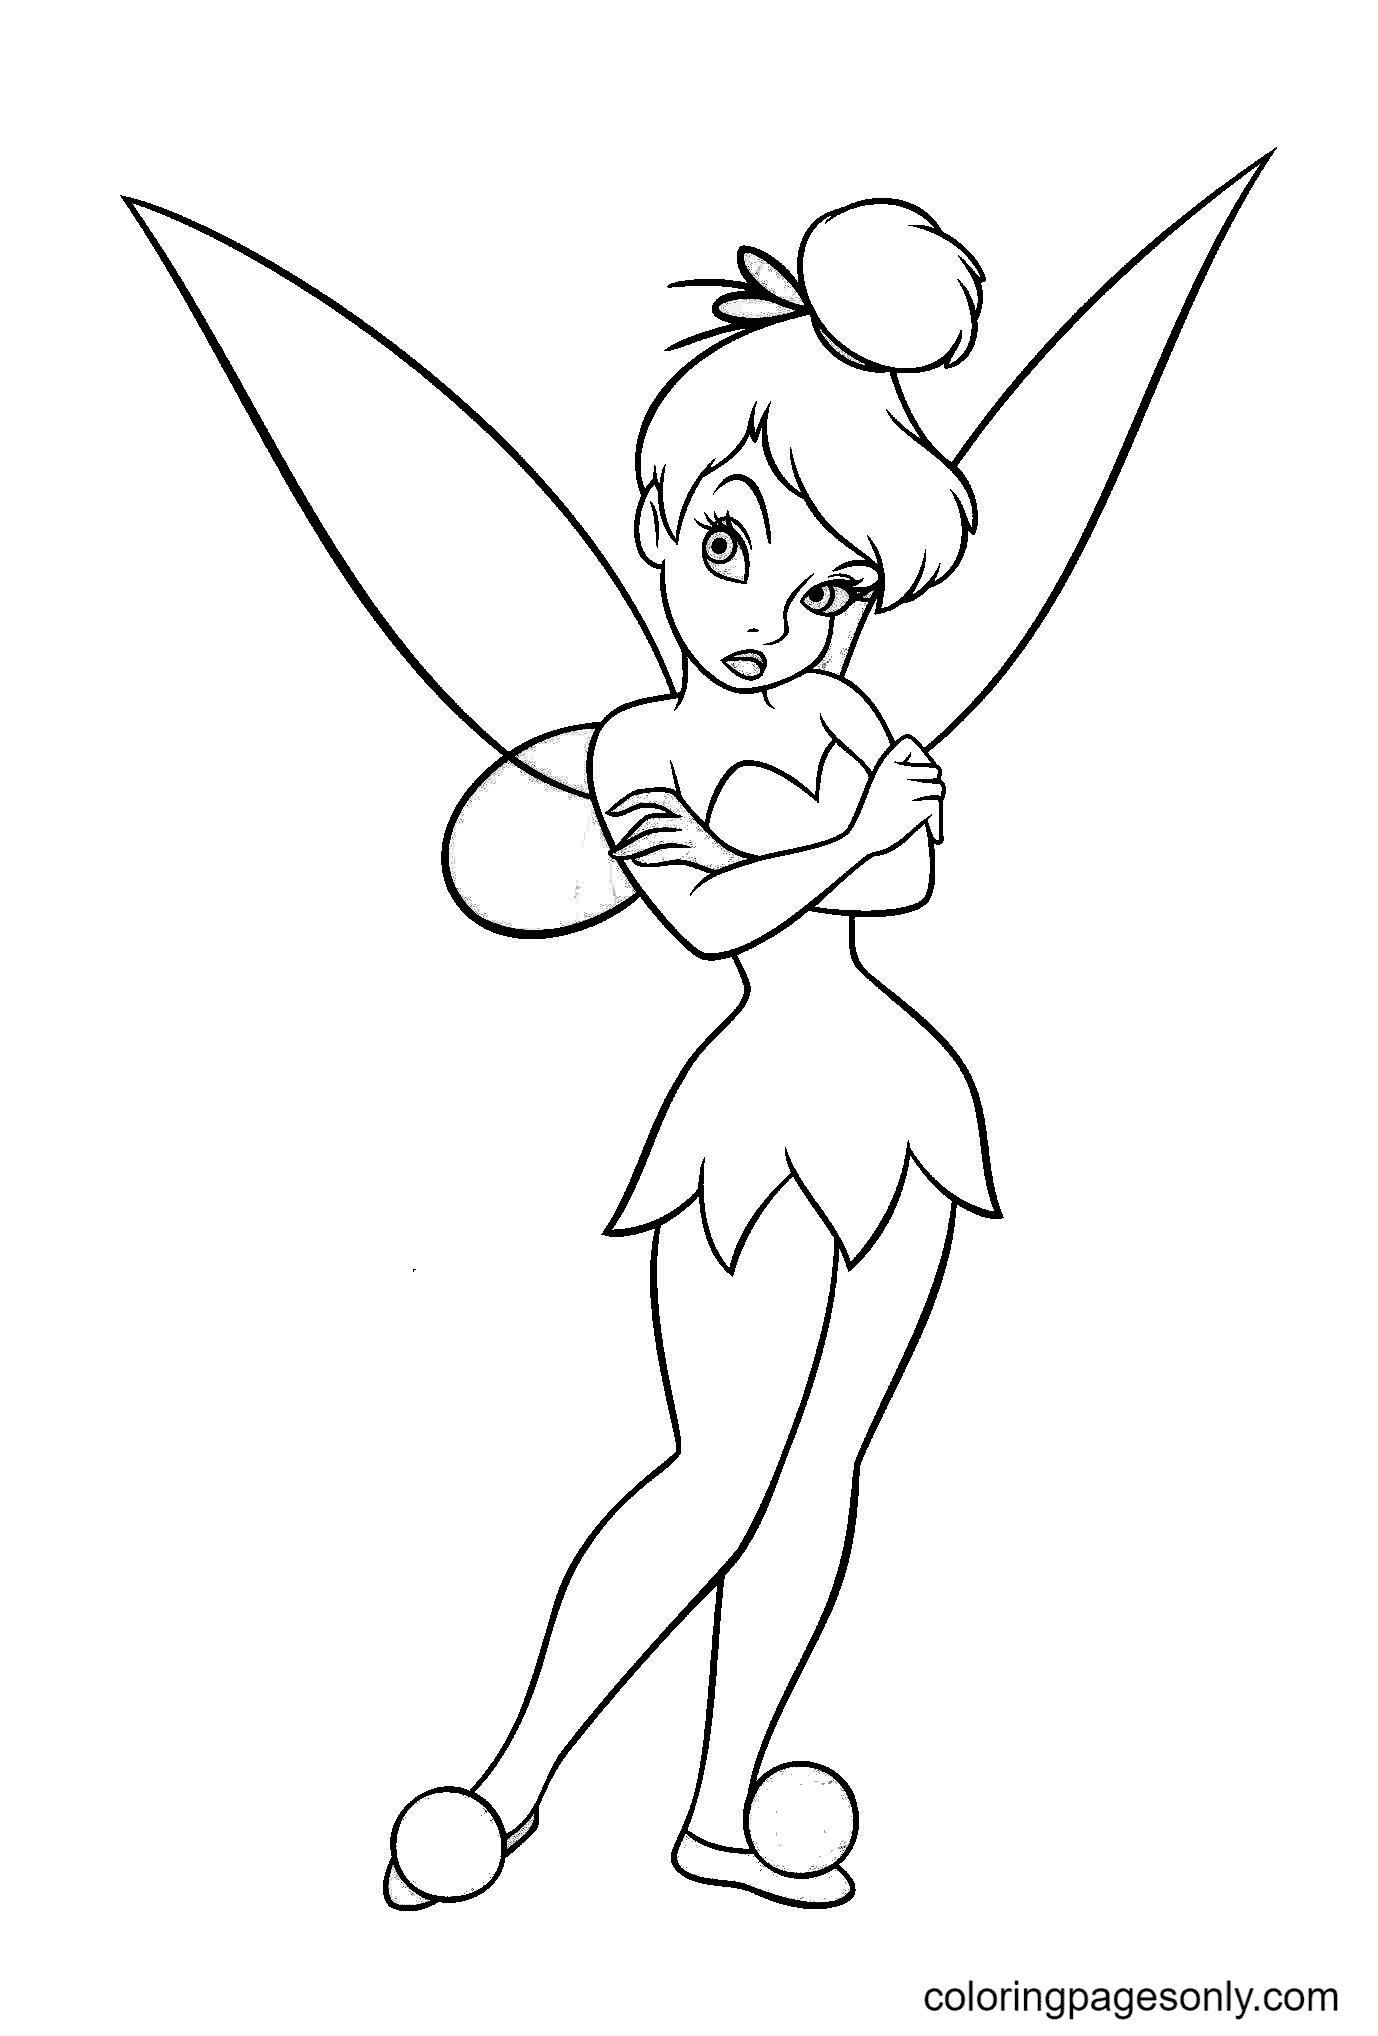 Awesome Tinkerbell Coloring Pages   Tinkerbell Coloring Pages ...